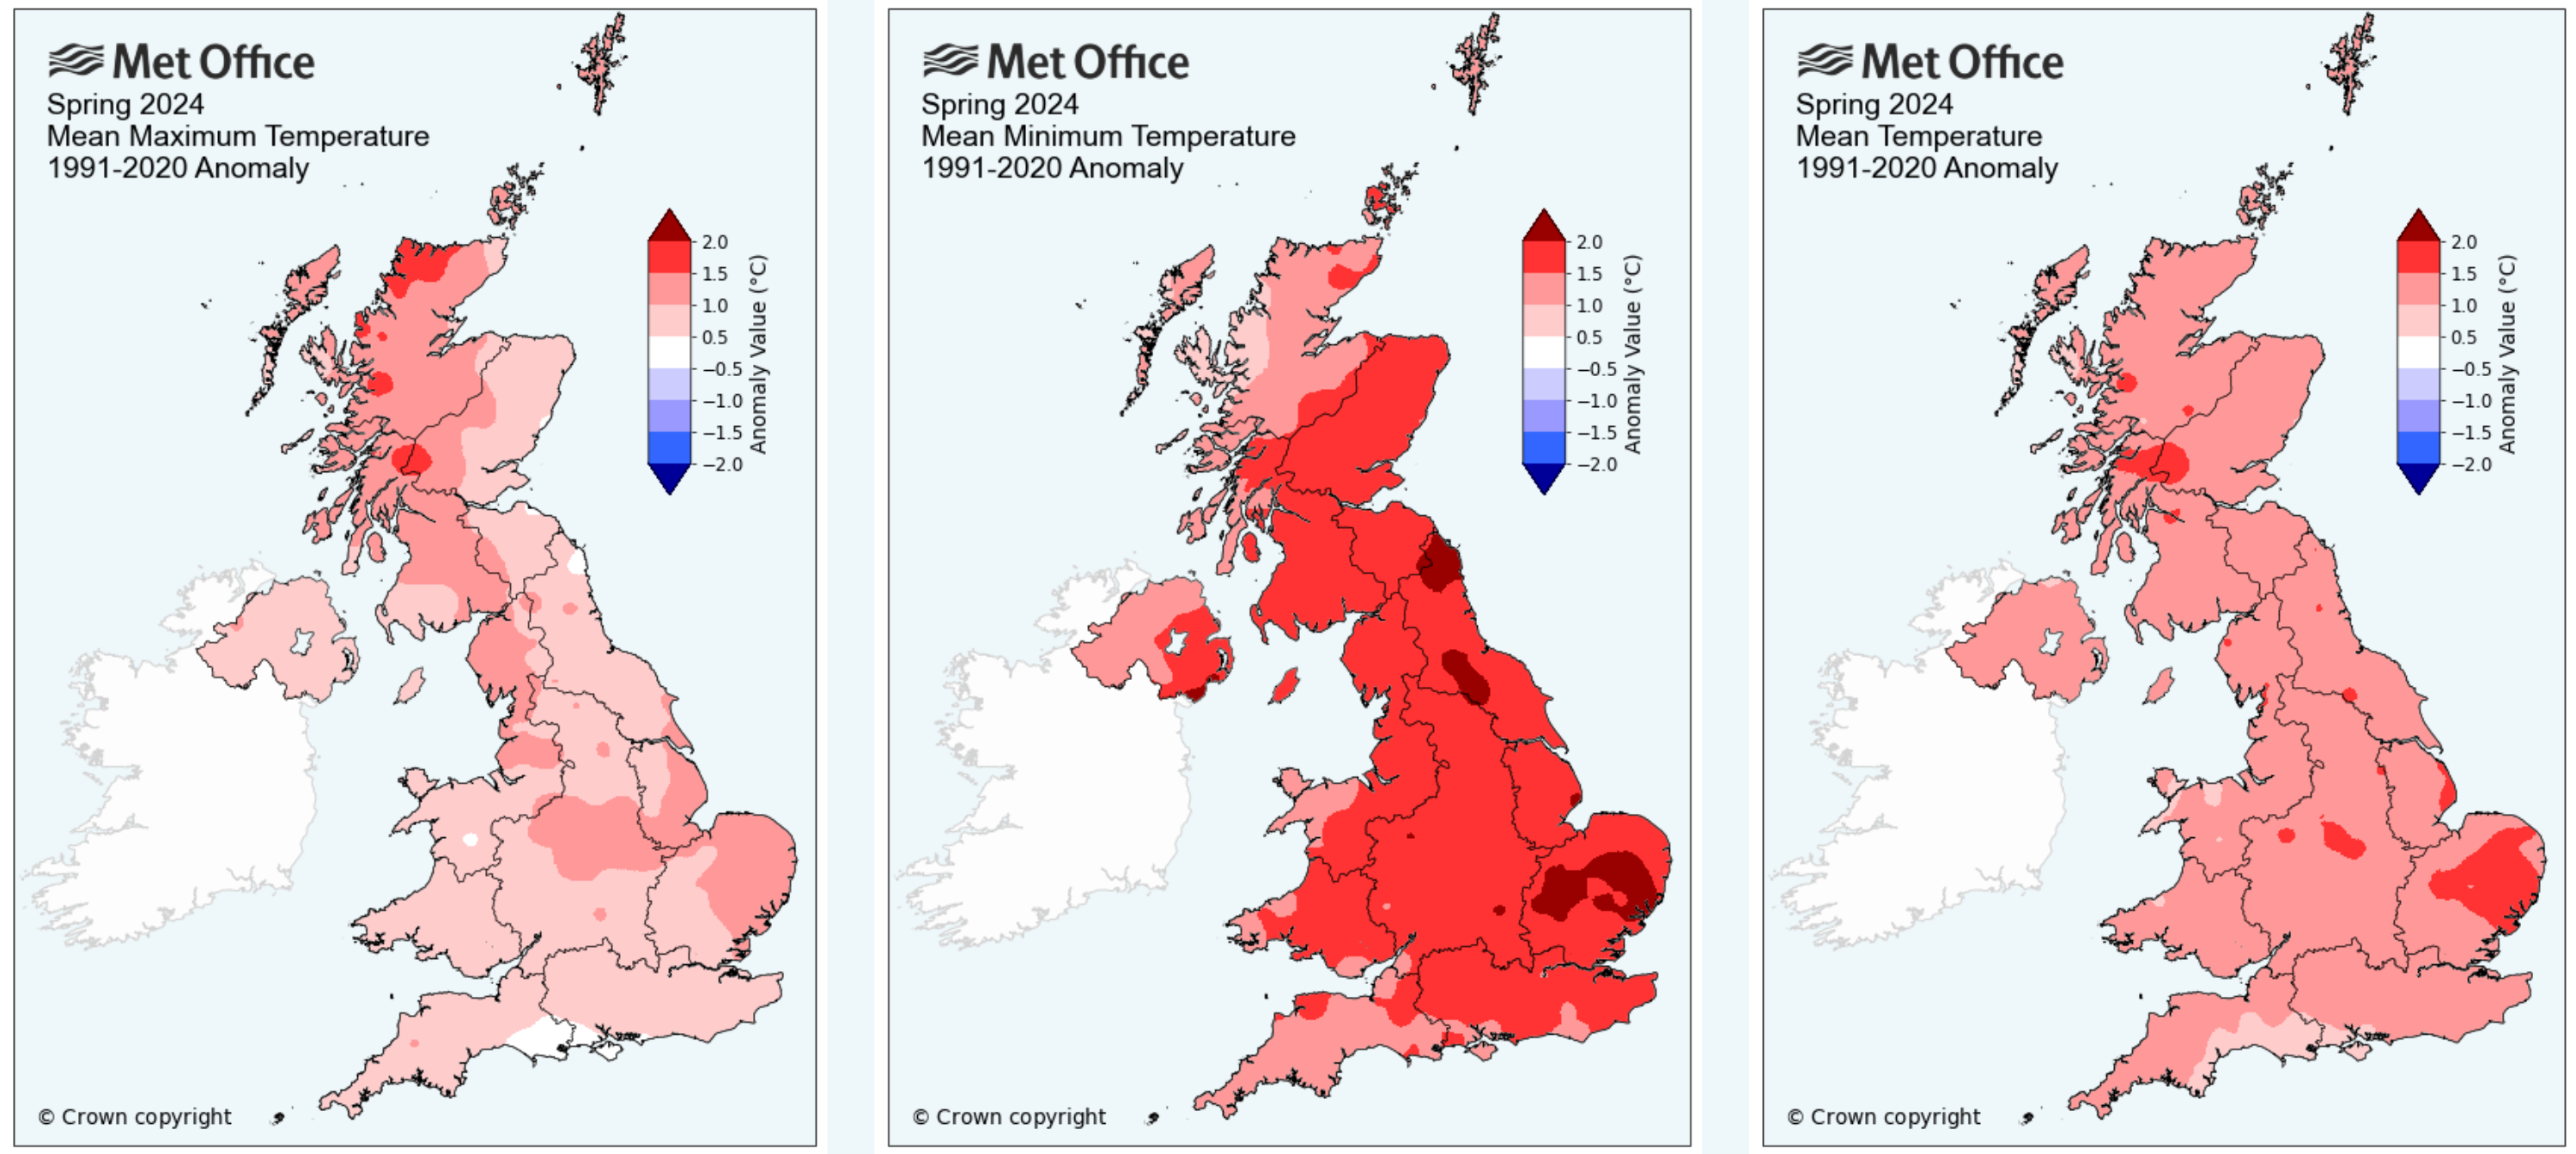 Maps showing UK mean temperature in spring 2024 compared to average. The maps show above average temperatures.